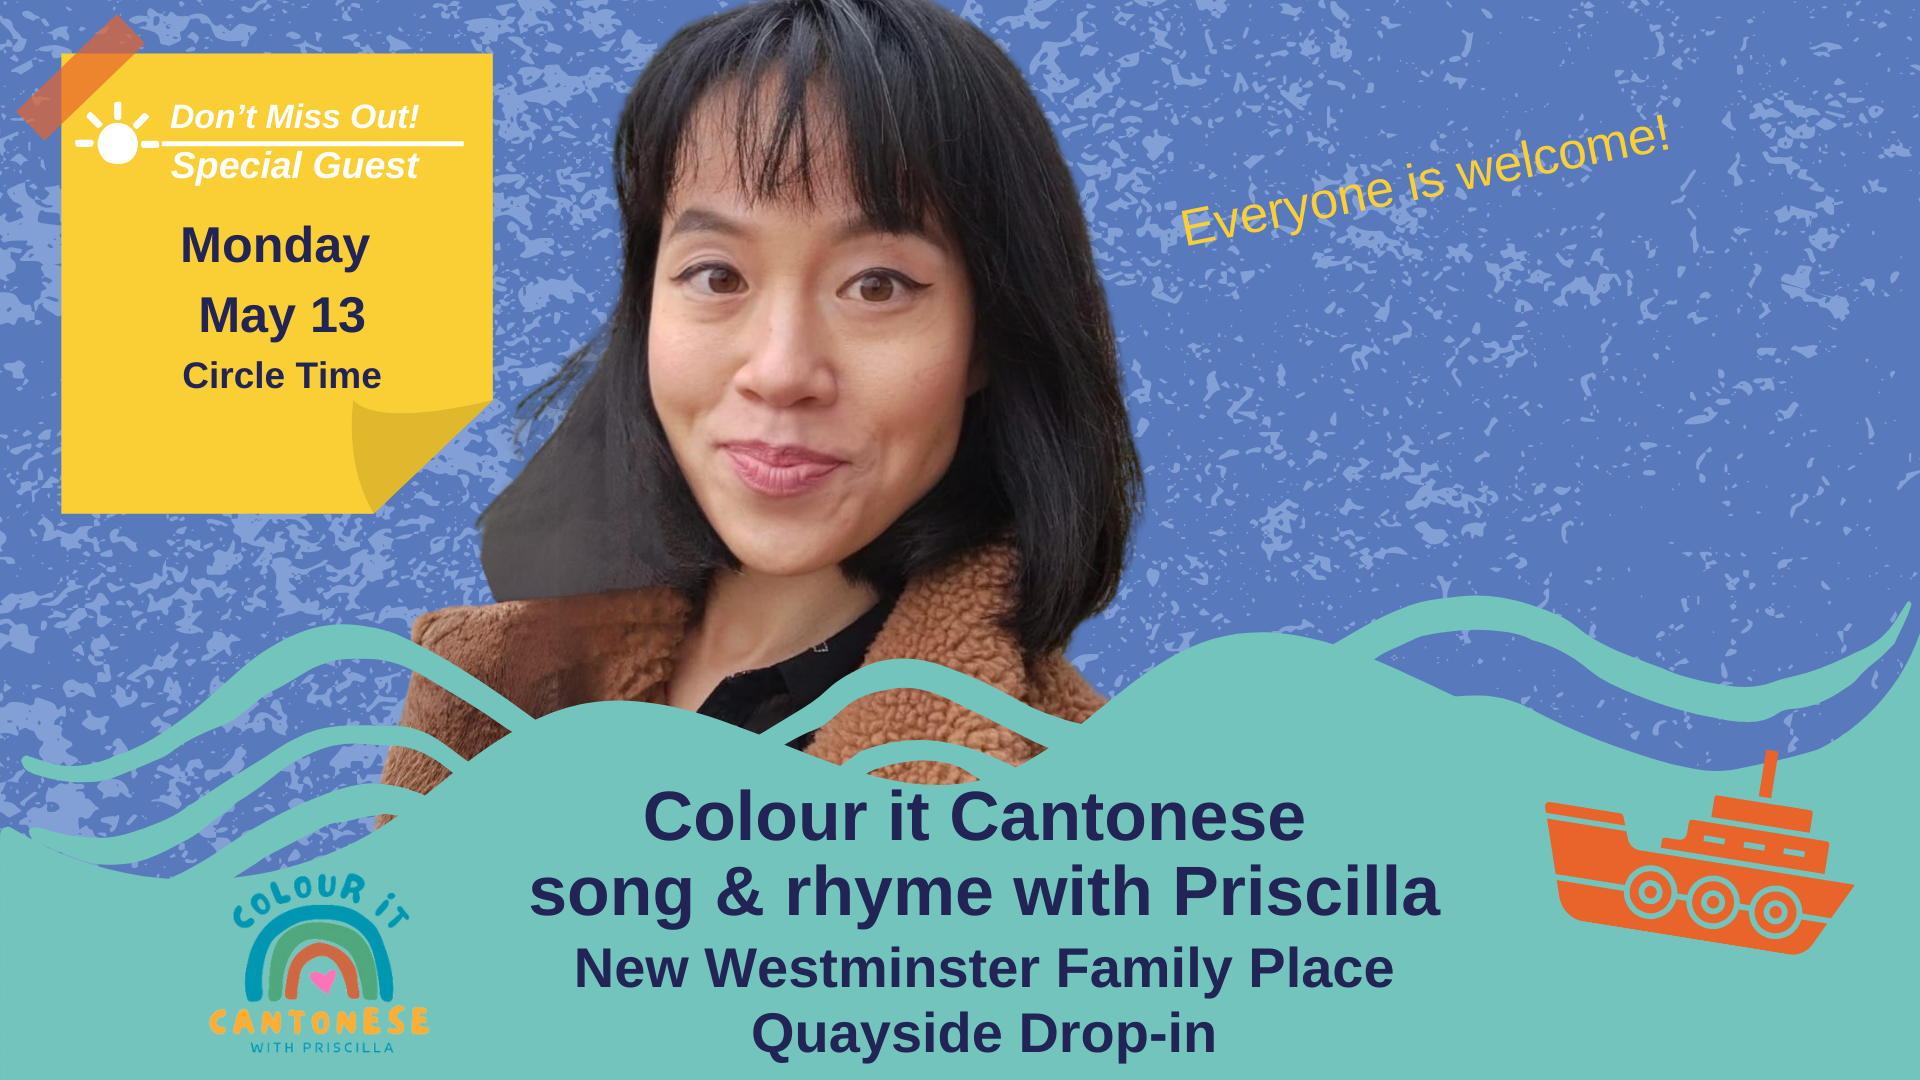 Photograph of Priscilla from Colour it Cantonese